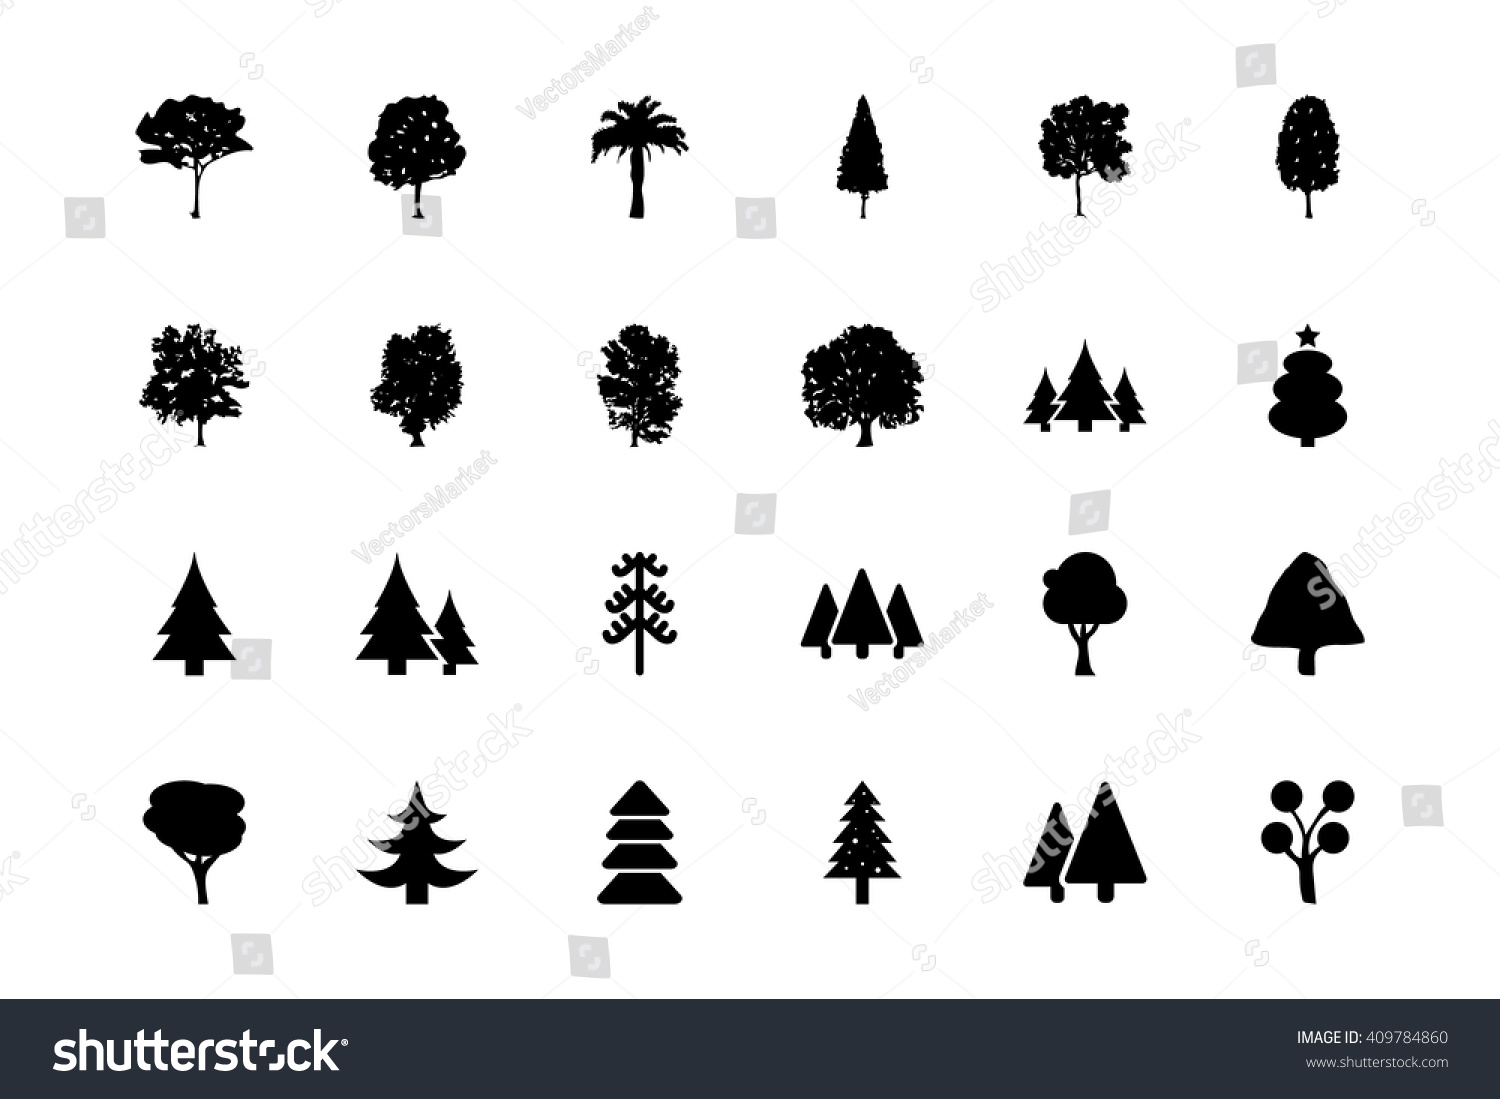 SVG of Trees Vector Icons 1 svg